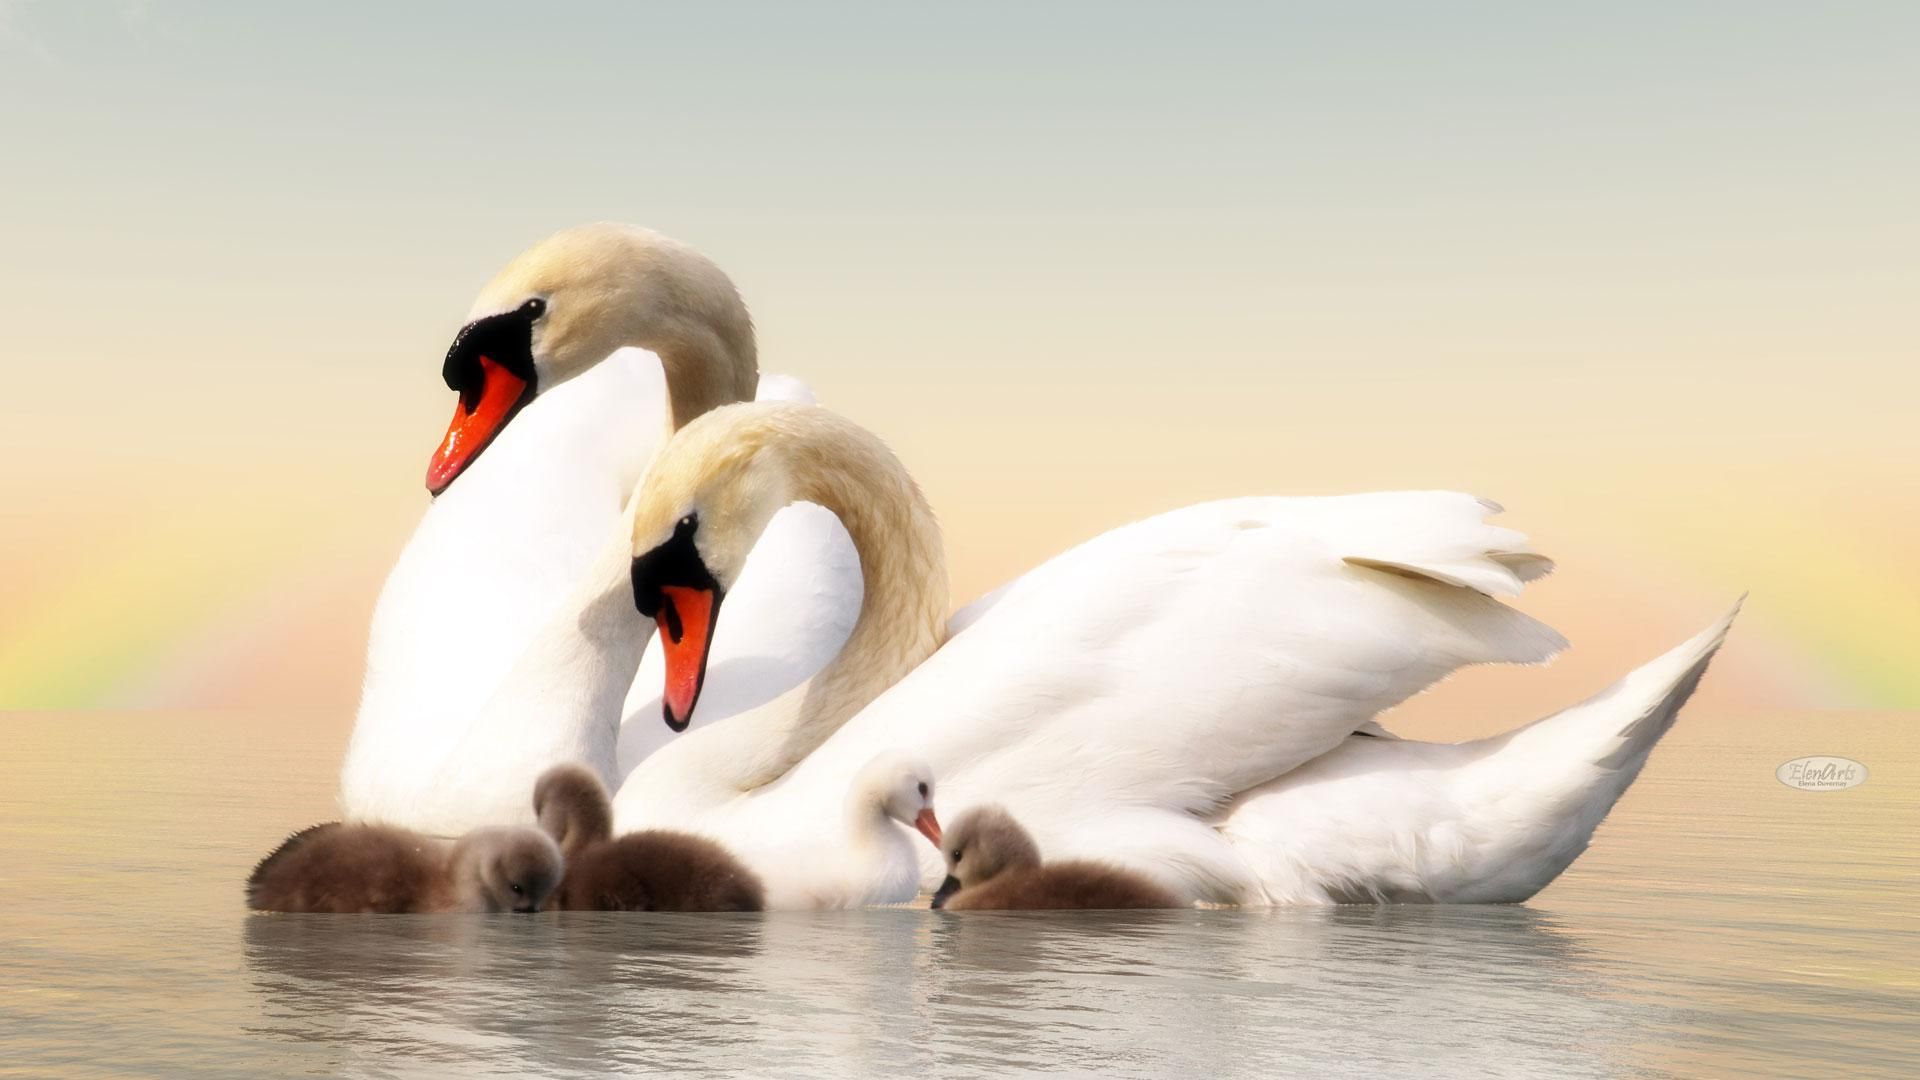 Swans at sunset, 1920x1080